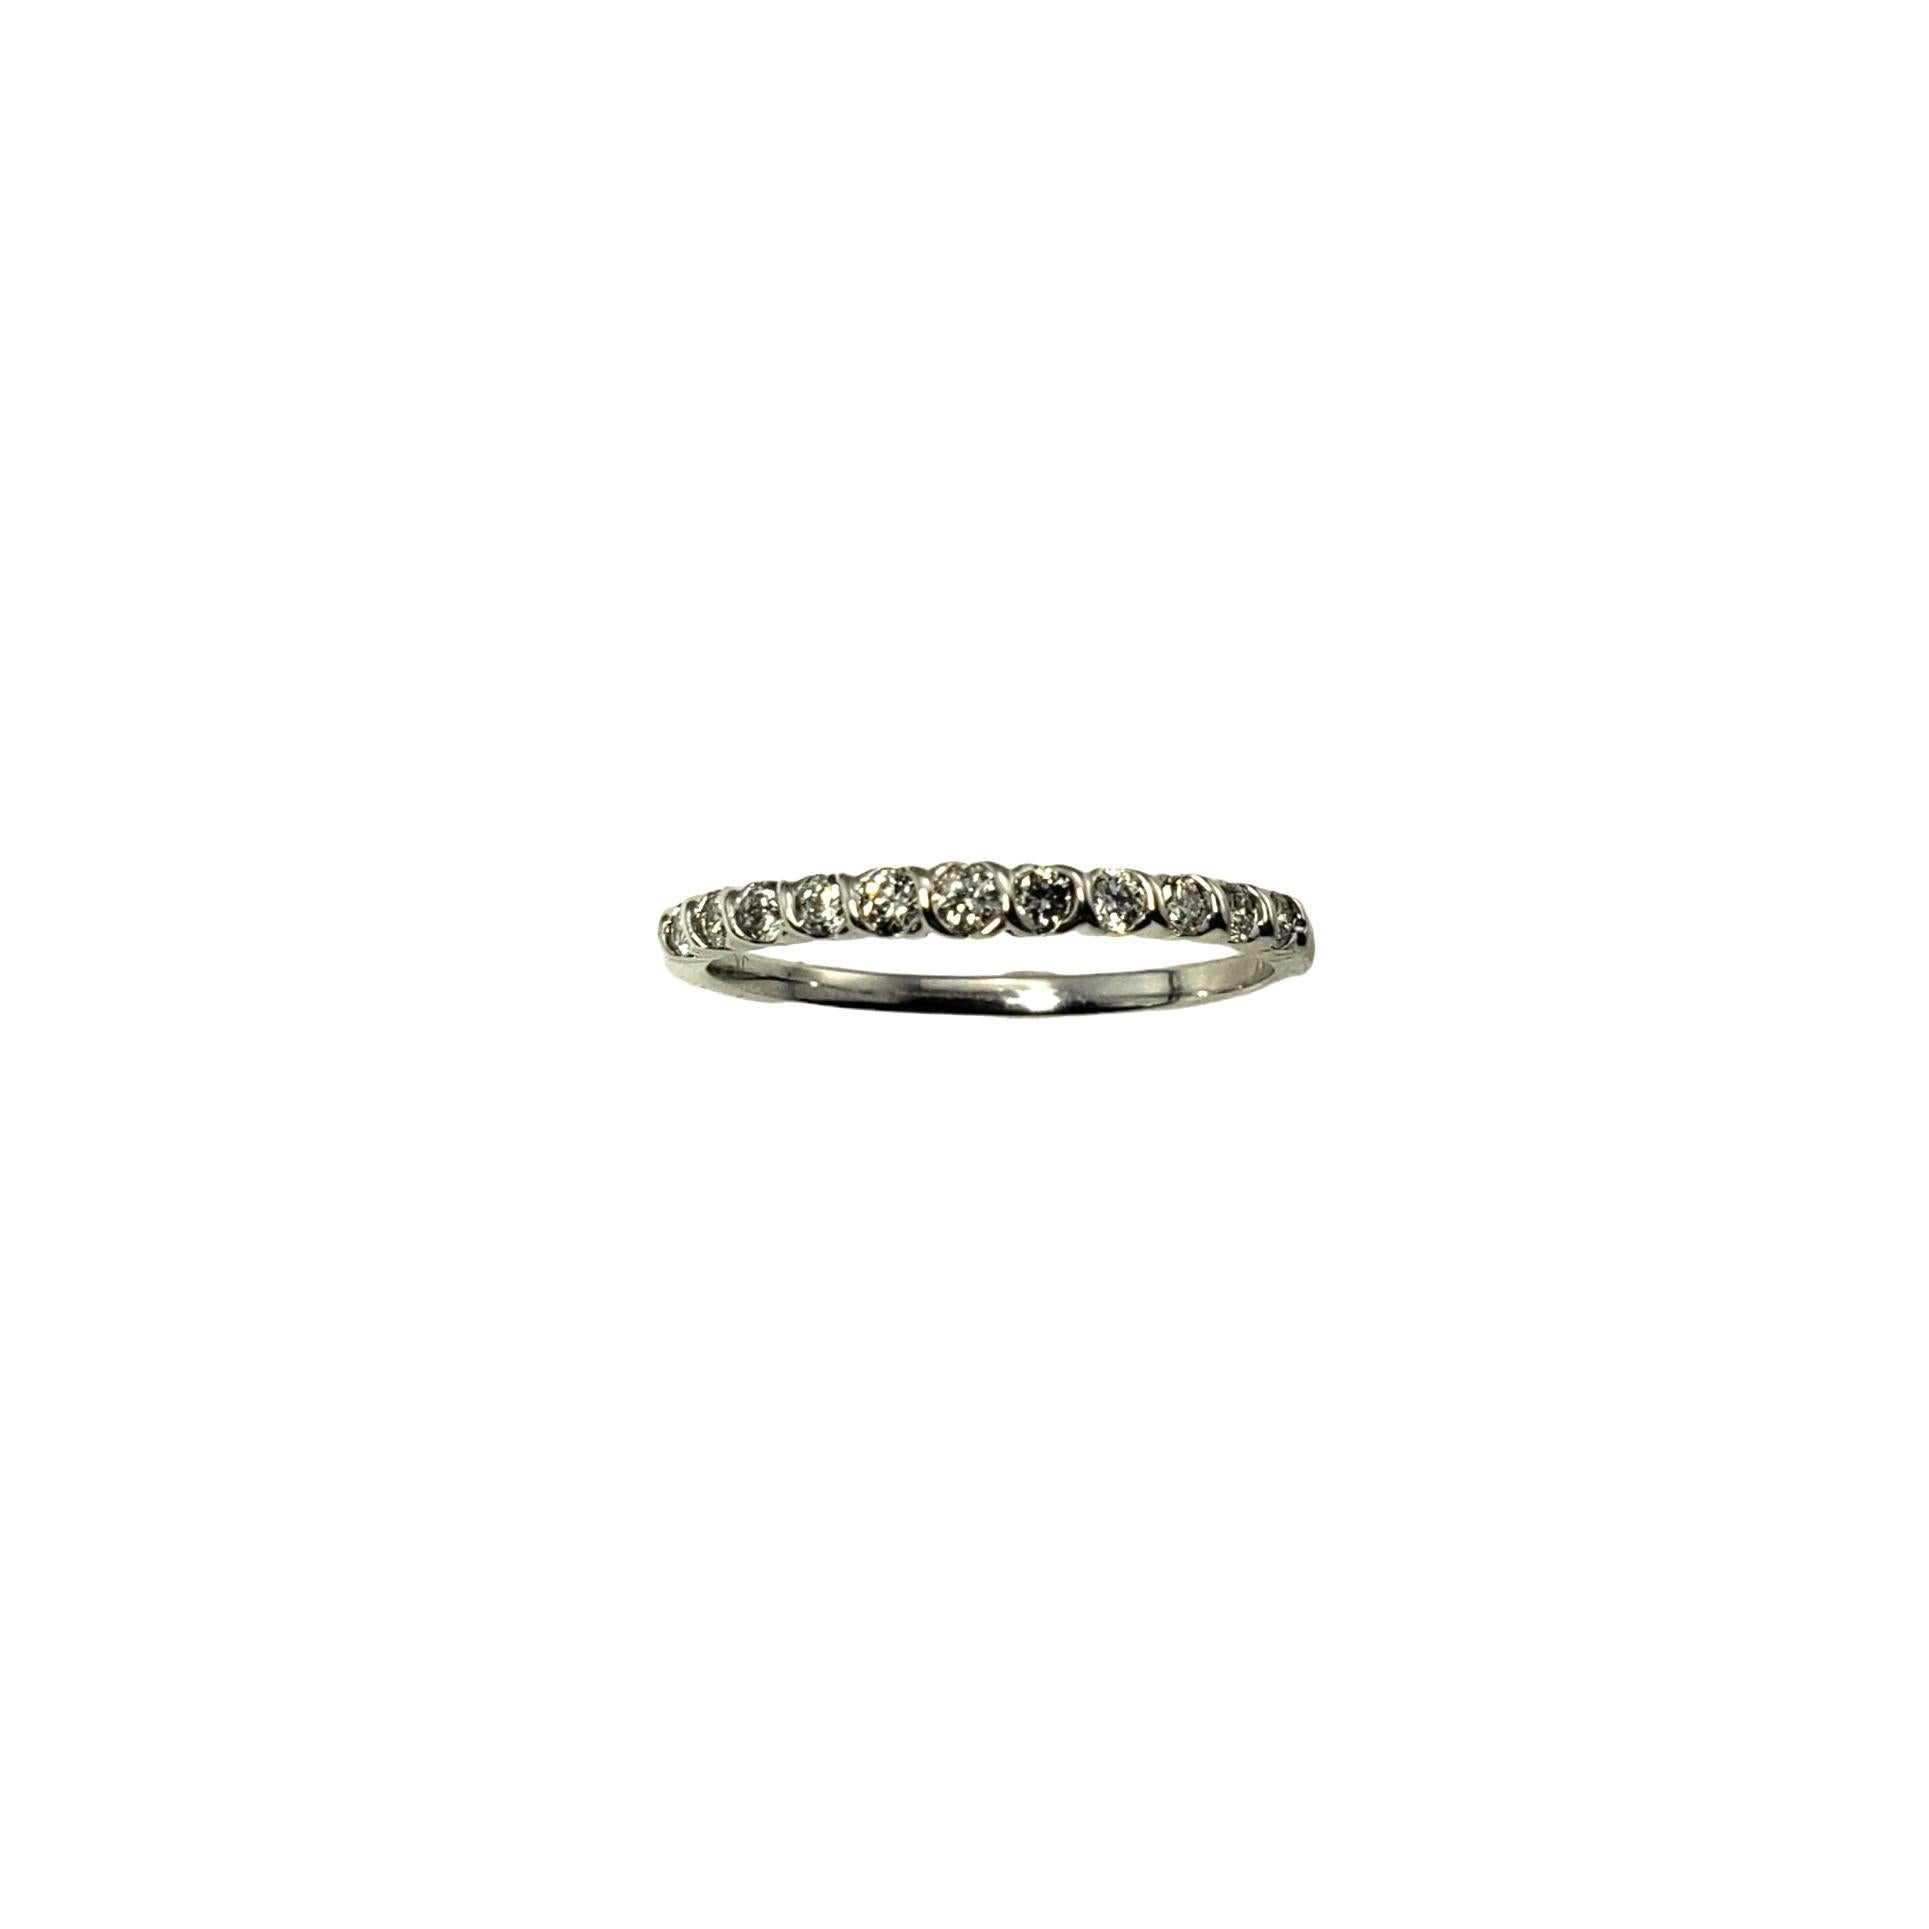 Vintage 10 Karat White Gold Diamond Band Ring Size 7-

This sparkling band features 11 round brilliant cut diamonds set in classic 10K white gold. Width: 2 mm.

Approximate total diamond weight: .33 ct.

Diamond color: H-I

Diamond clarity: